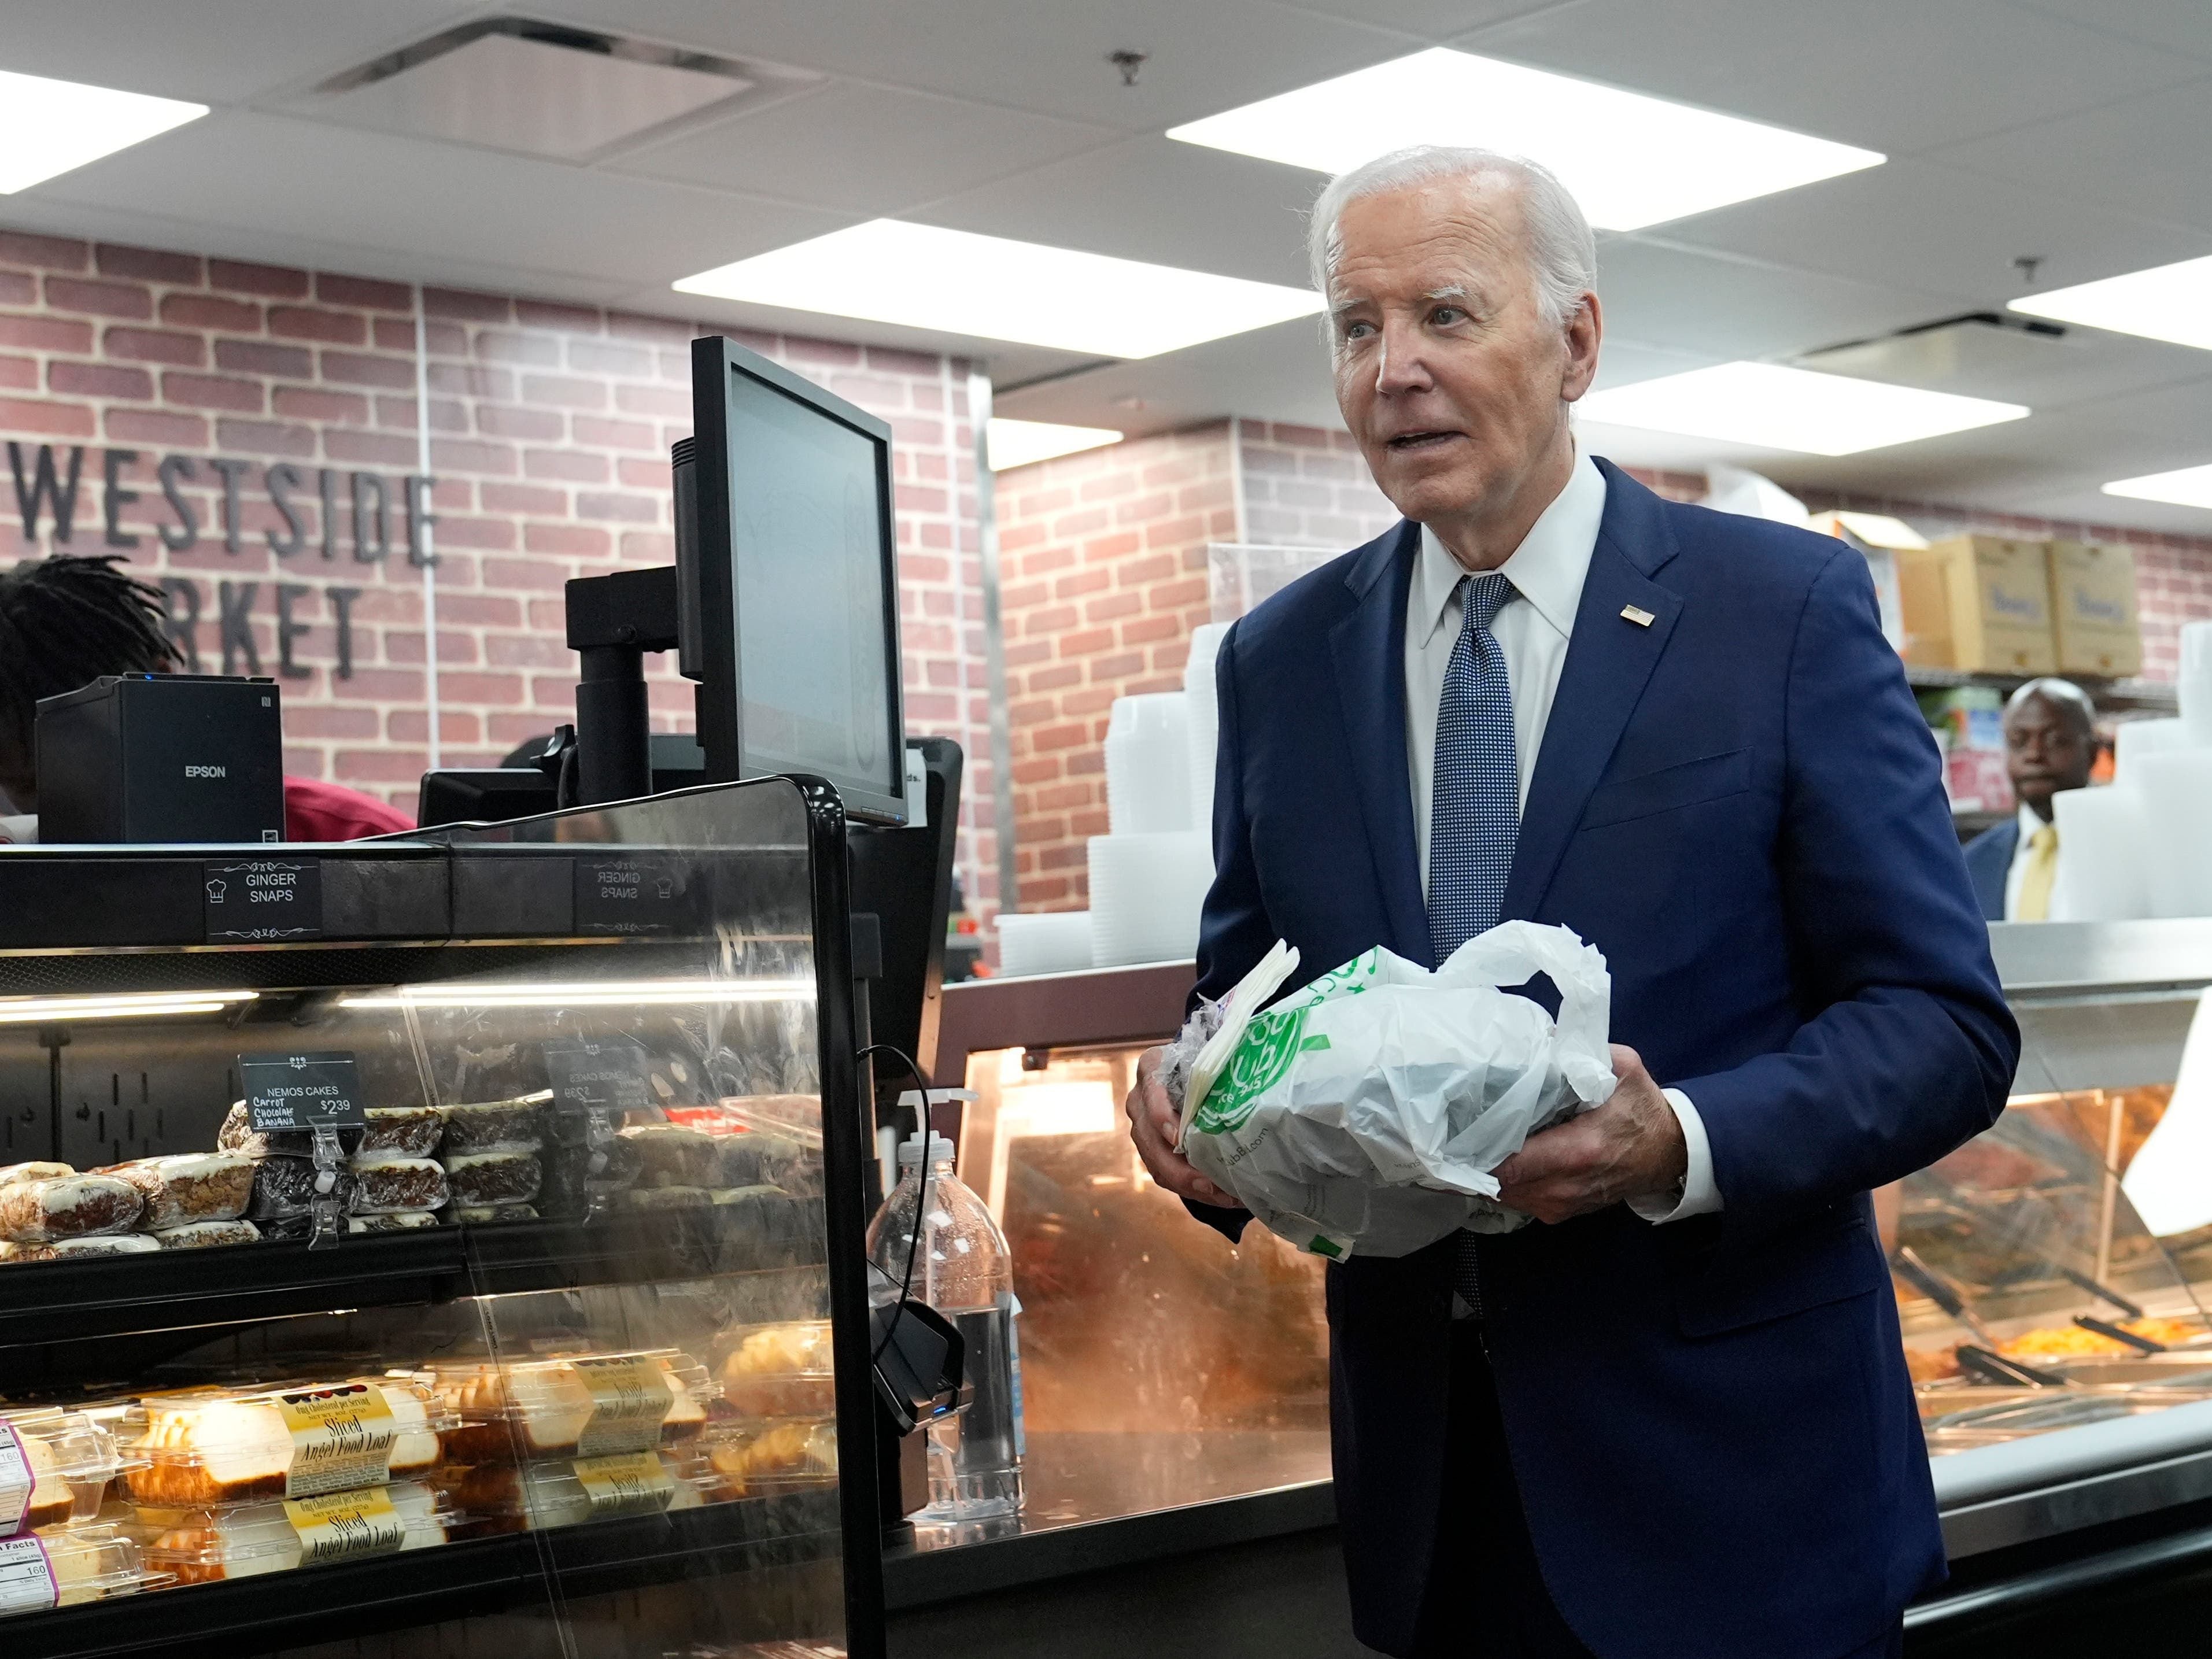 Nearly two-thirds of Democrats want Biden to withdraw, poll finds